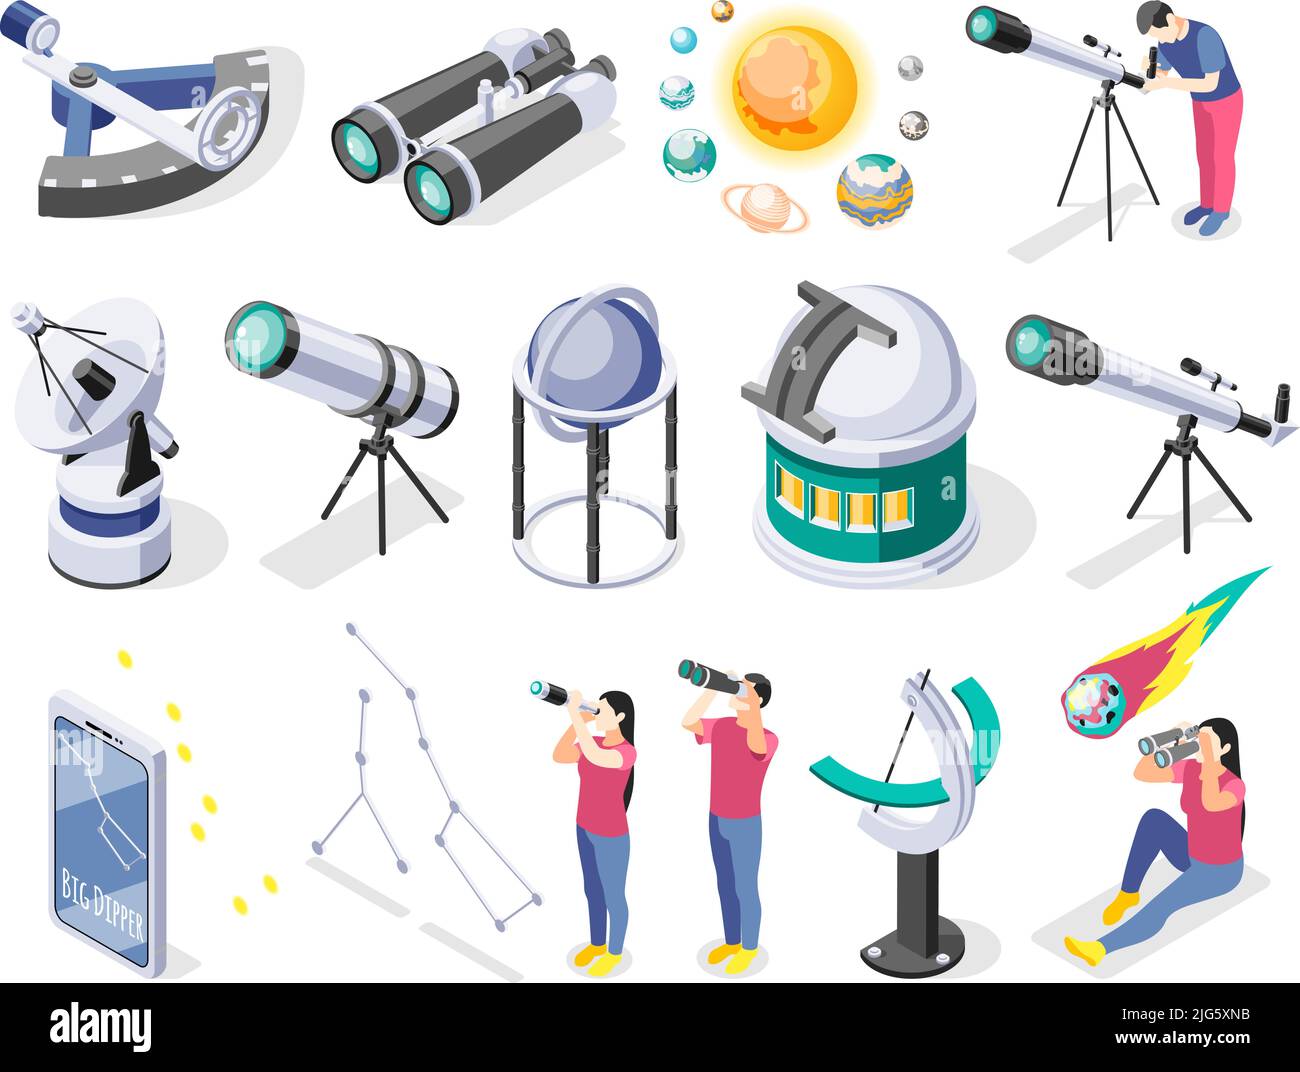 Astronomy isometric recolor set of isolated icons of telescopes radars and various observational facilities with people vector illustration Stock Vector